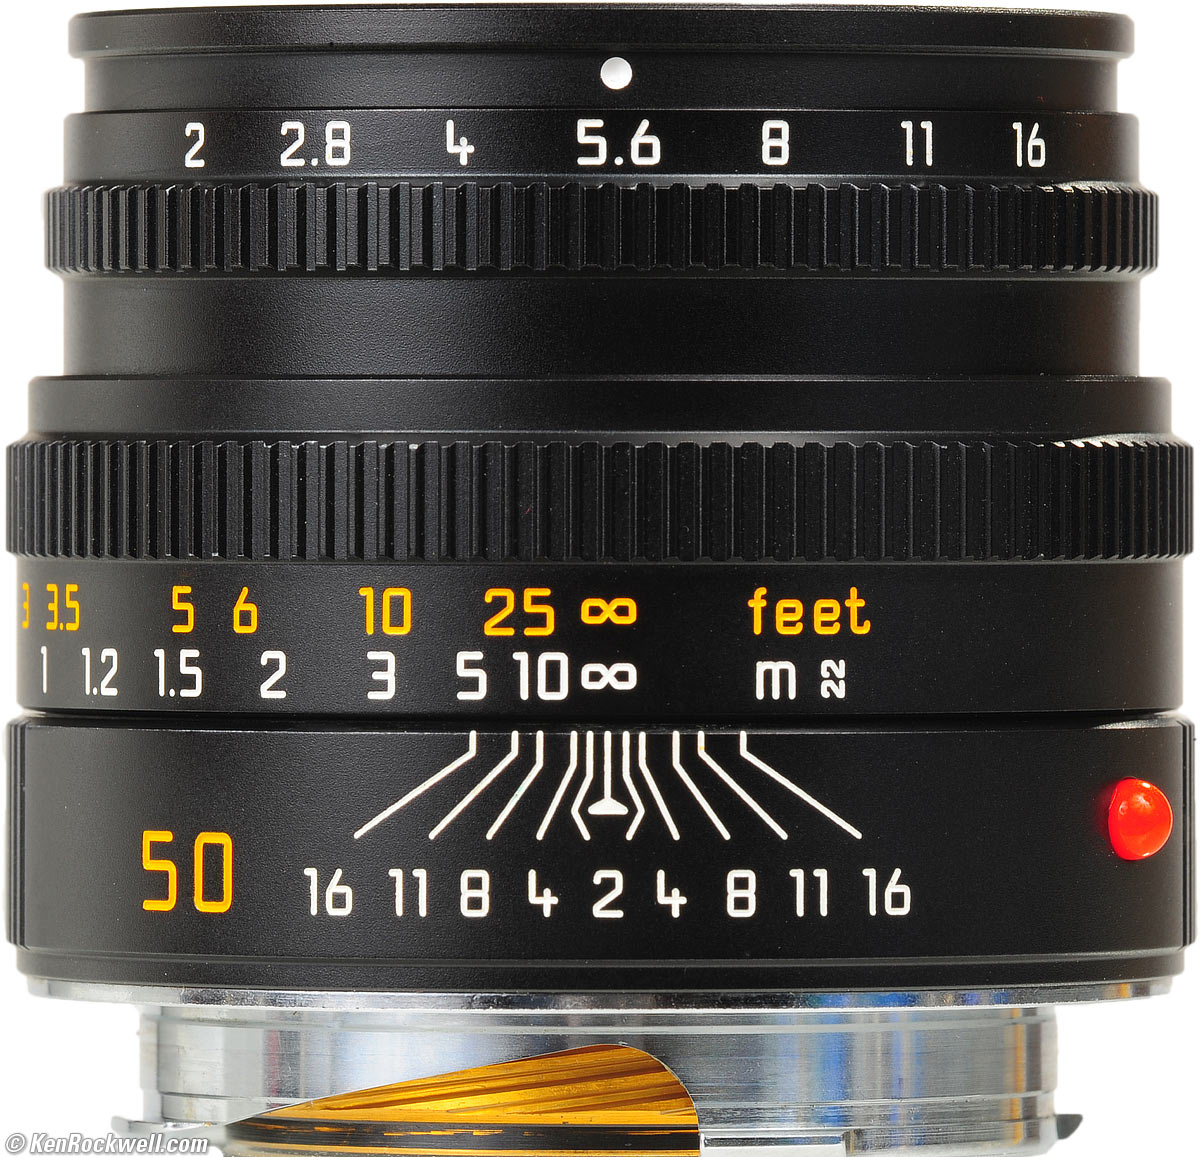 LEICA 50mm f/2 SUMMICRON-M (1979-today)